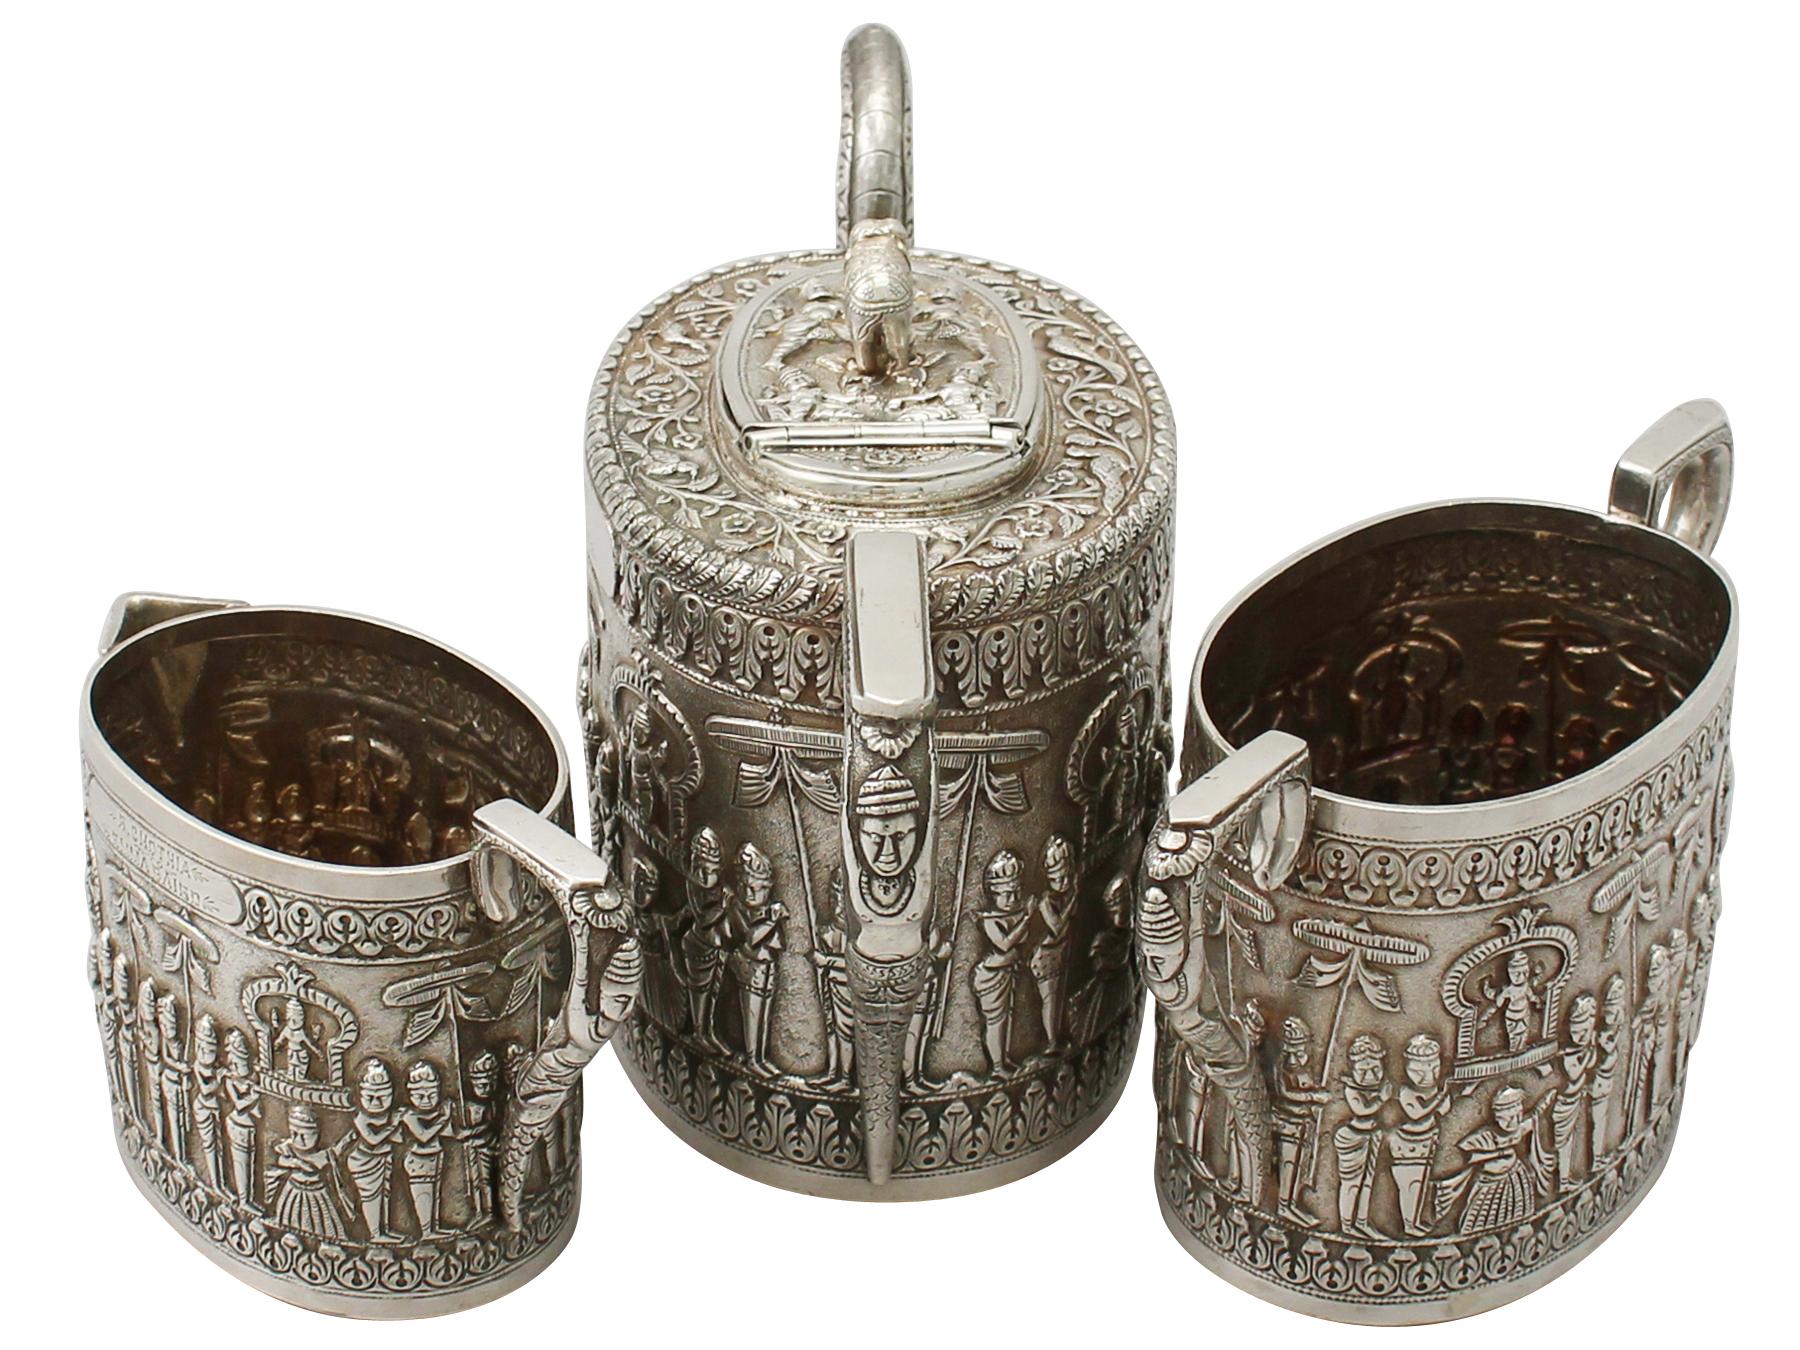 An exceptional, fine and impressive antique Indian sterling silver four piece tea service; an addition to our diverse silver teaware collection.

This exceptional antique Indian sterling silver four piece tea service or set consists of a spirit